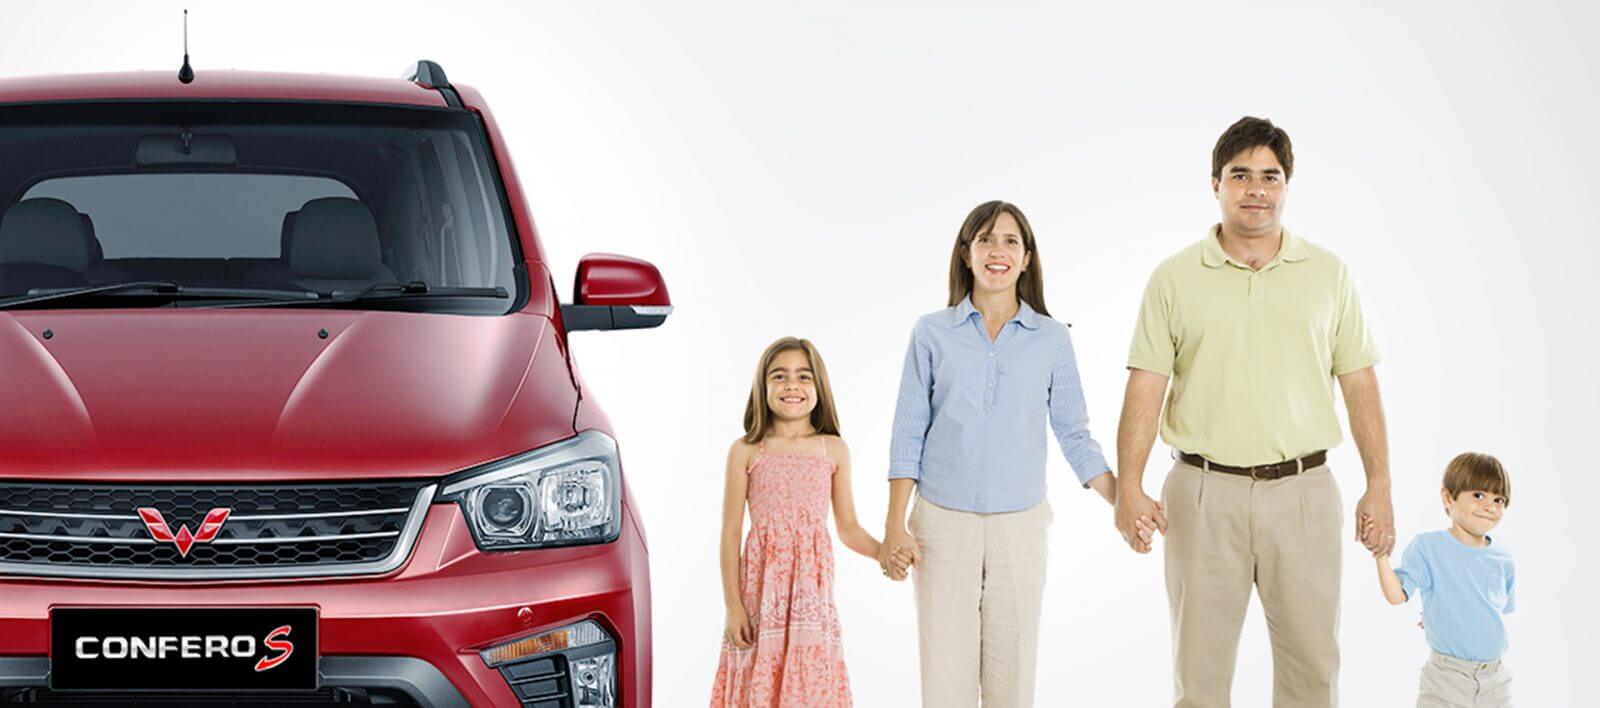 Image MPV Car That is Affordable and Comfortable for Your Little Family